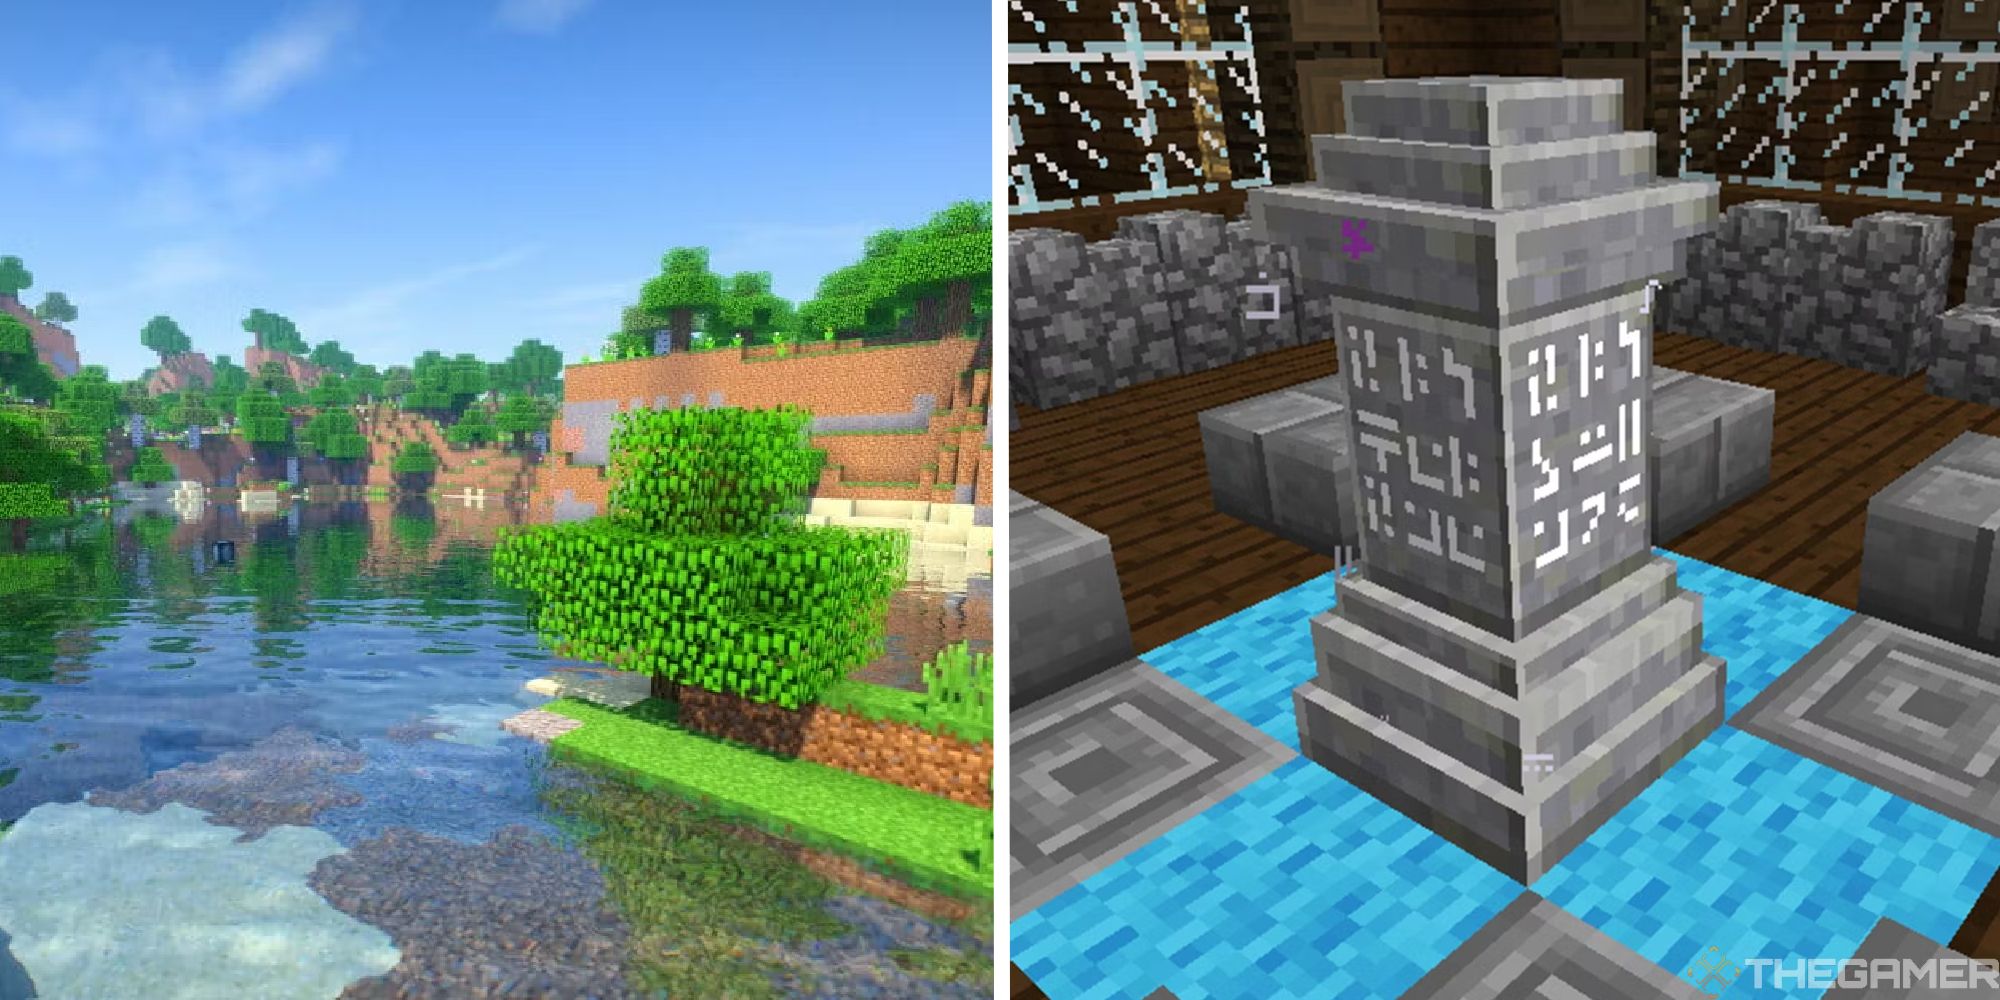 image of minecraft world with shaders, next to image of modded waystone